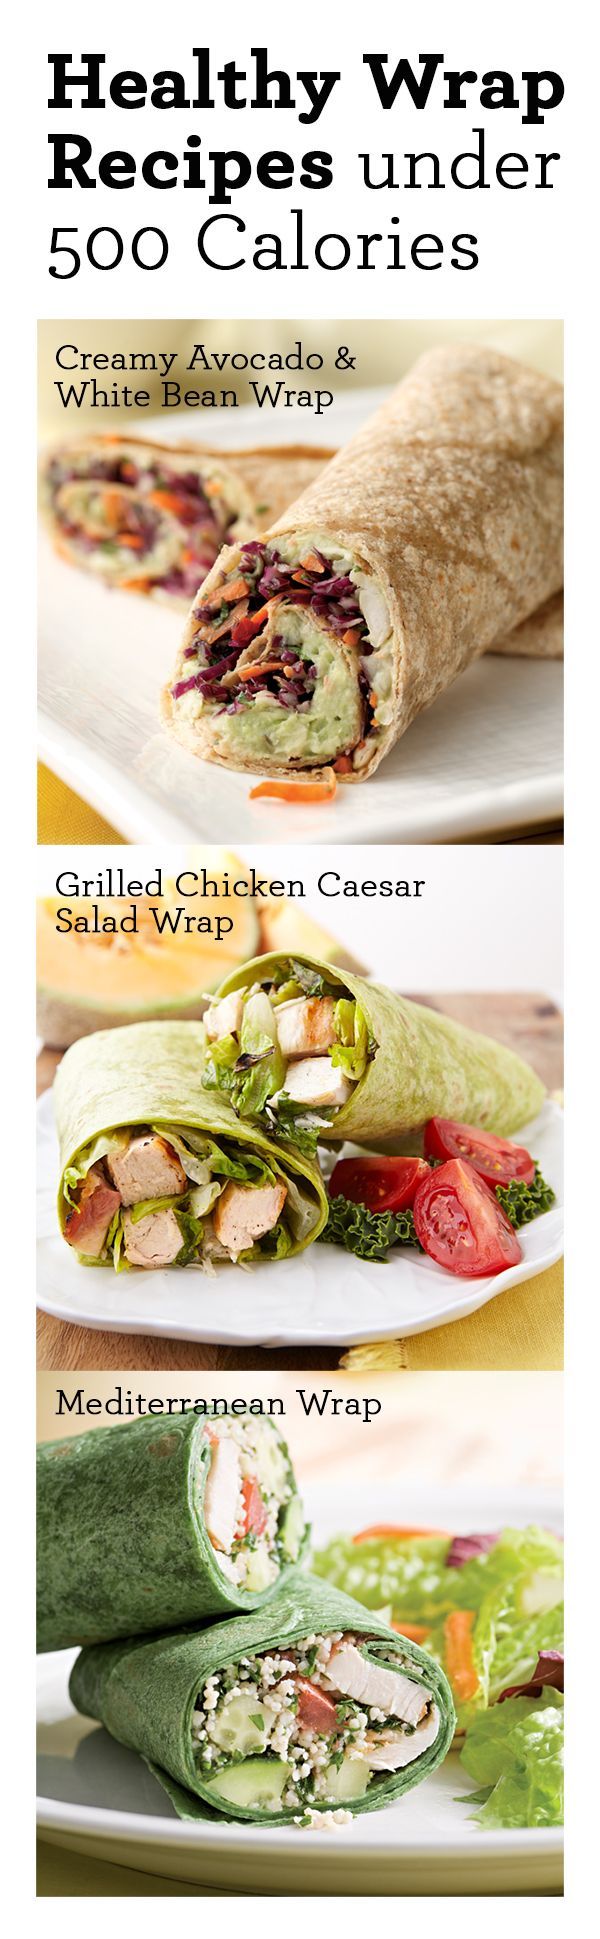 Tortilla wraps are a great way to have a filling, low calorie meal! Super easy a